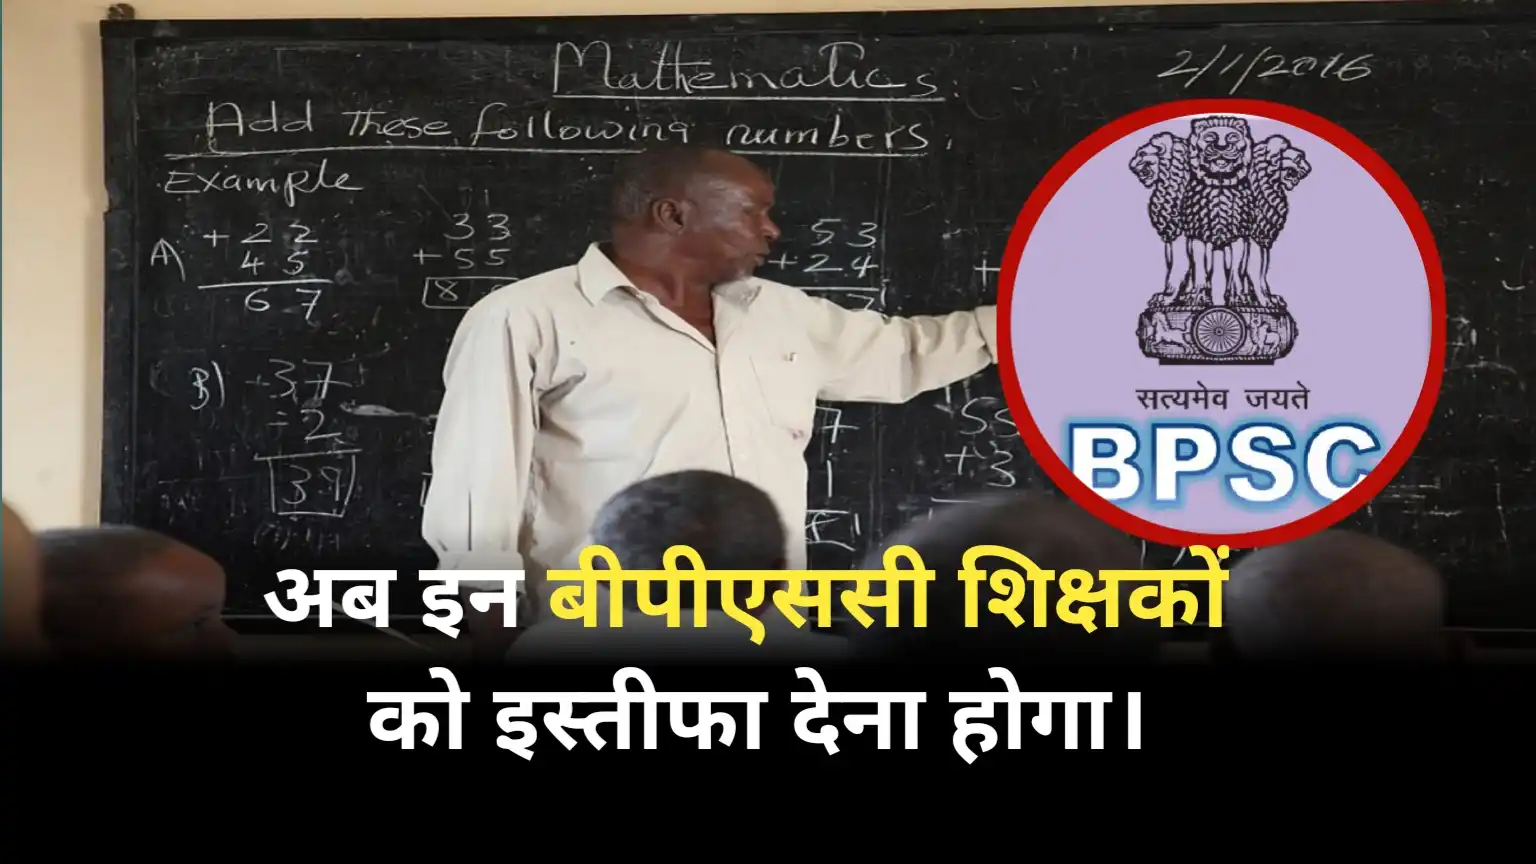 Now BPSC teachers will have to resign